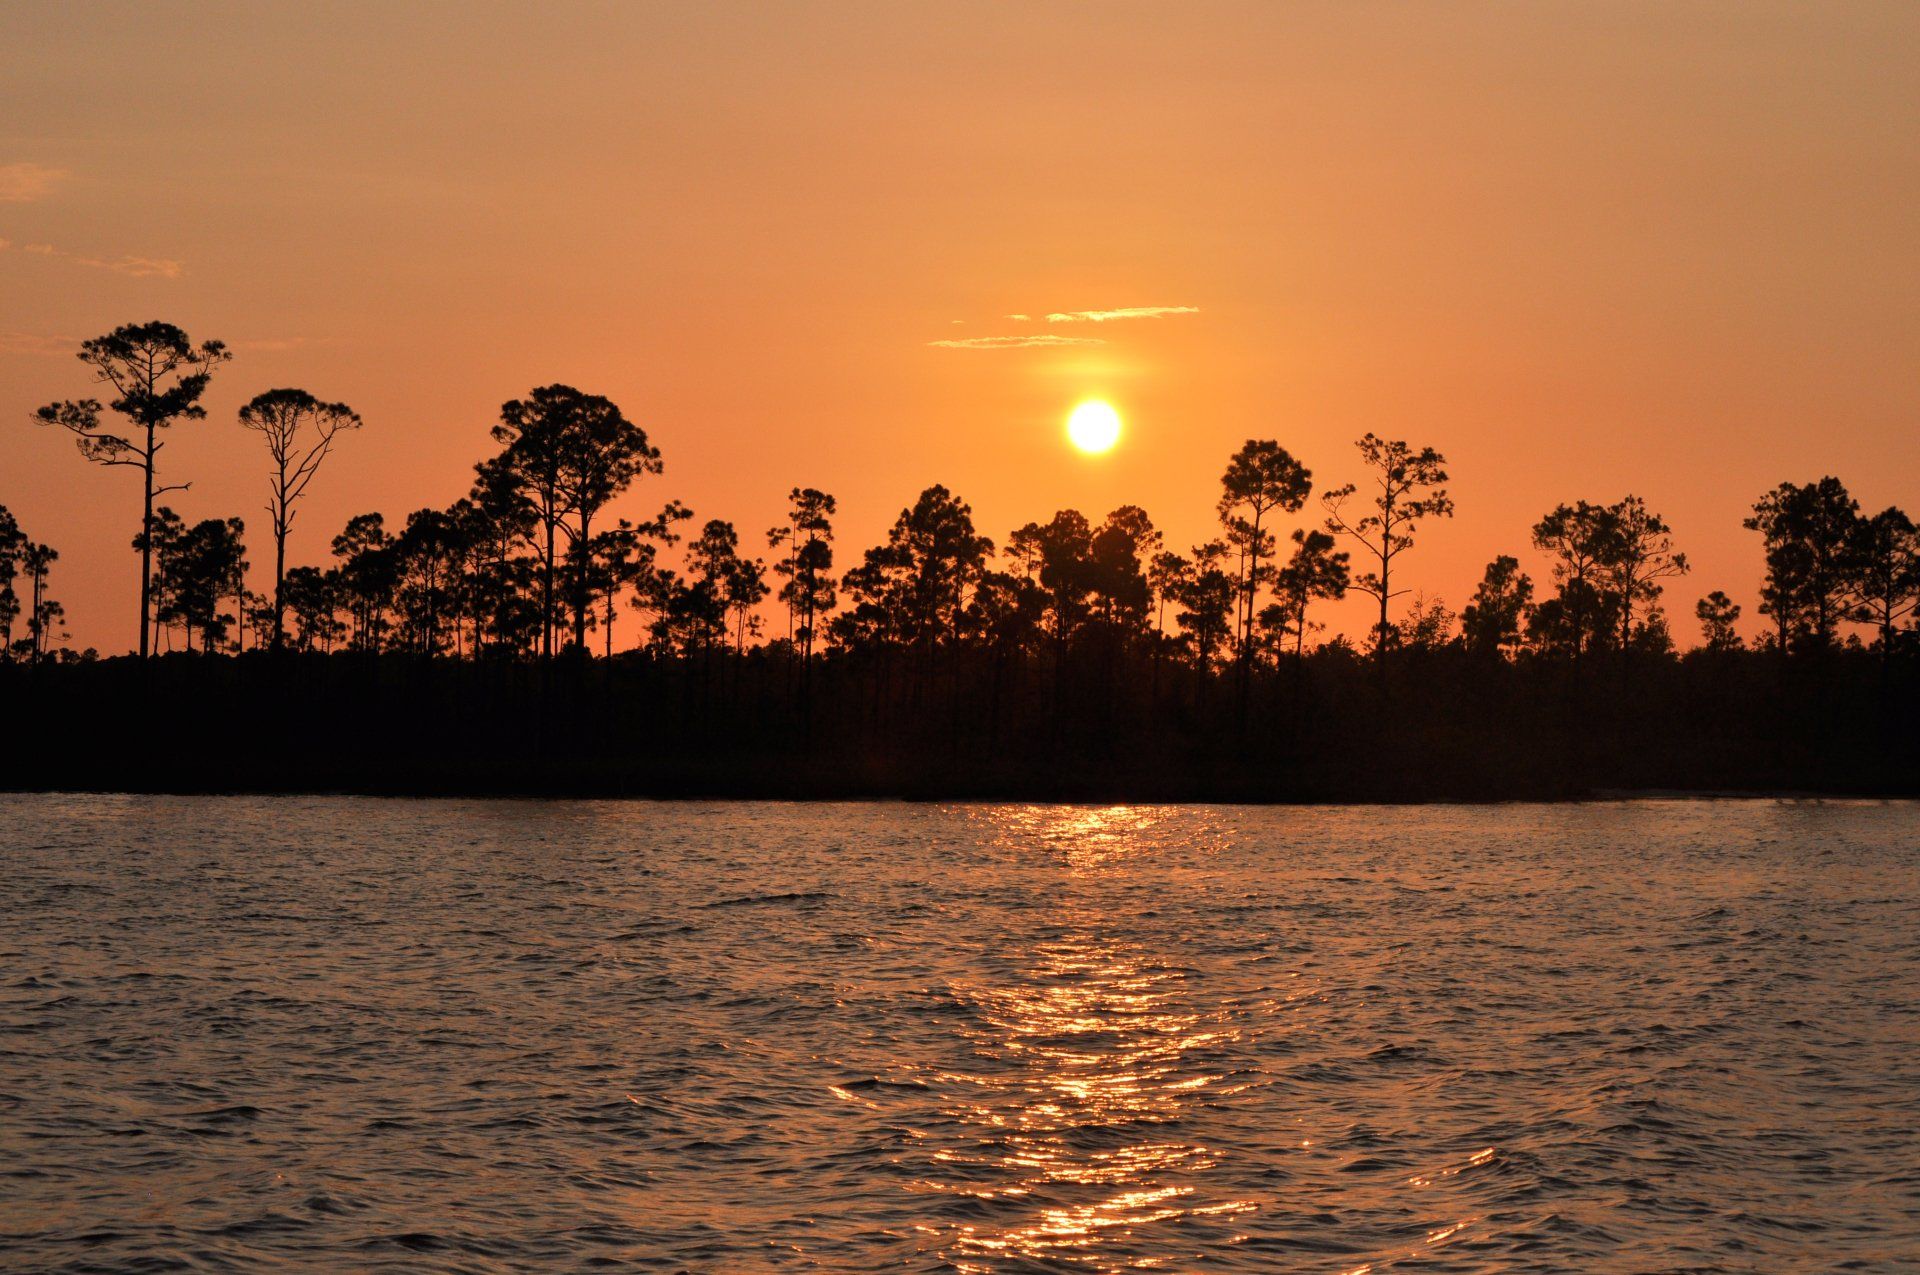 A sunset over a body of water with trees in the foreground